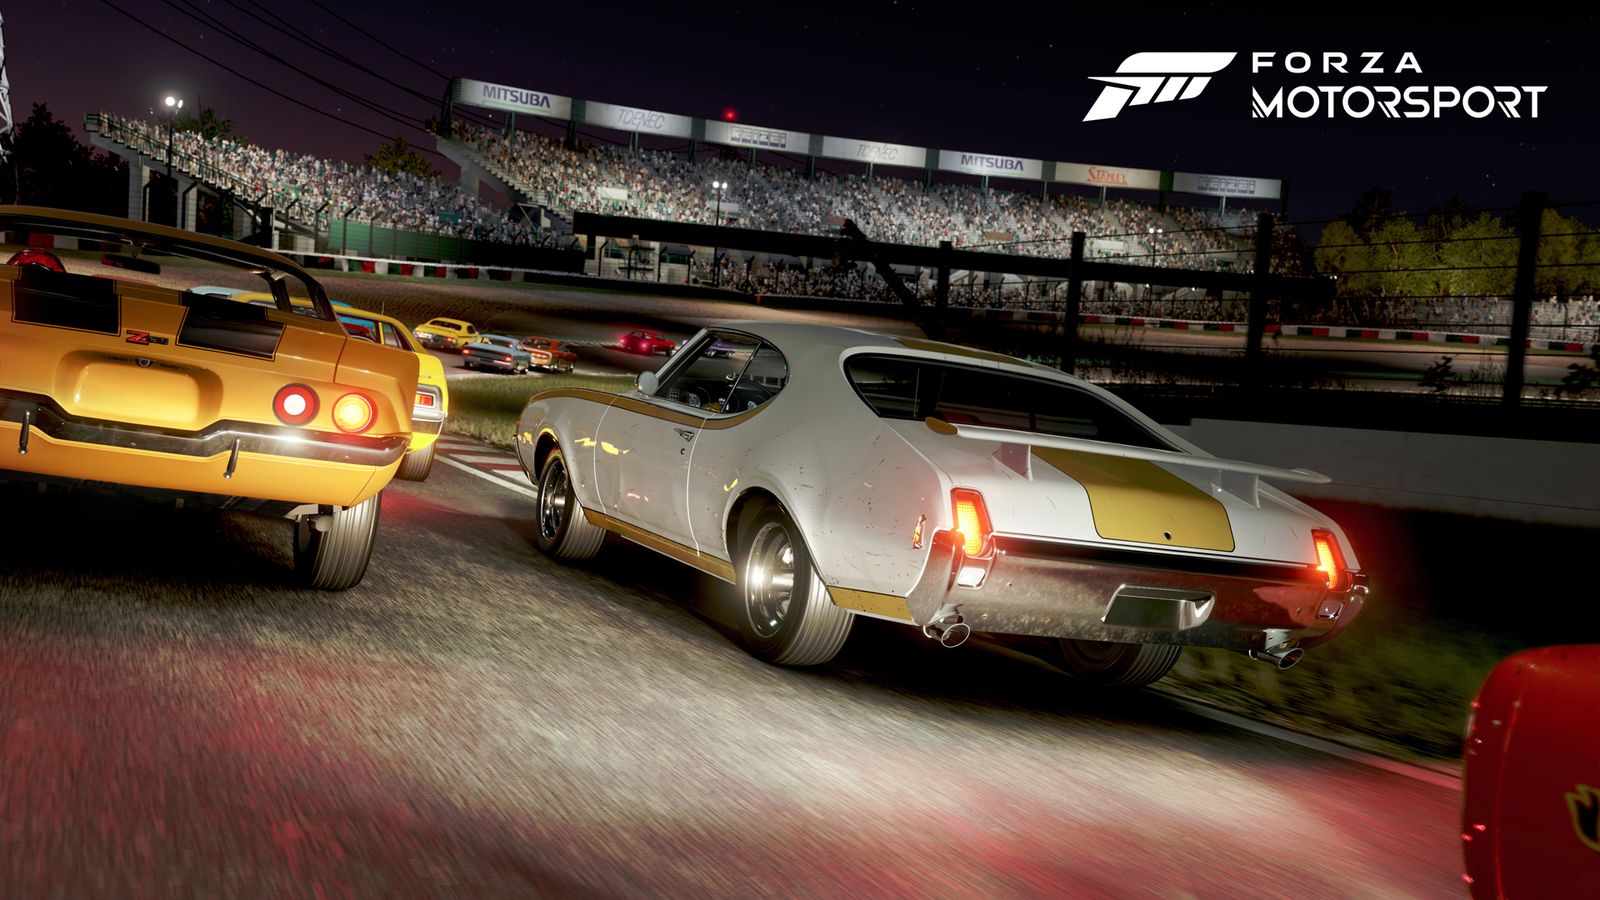 Forza Motorsport reportedly delayed